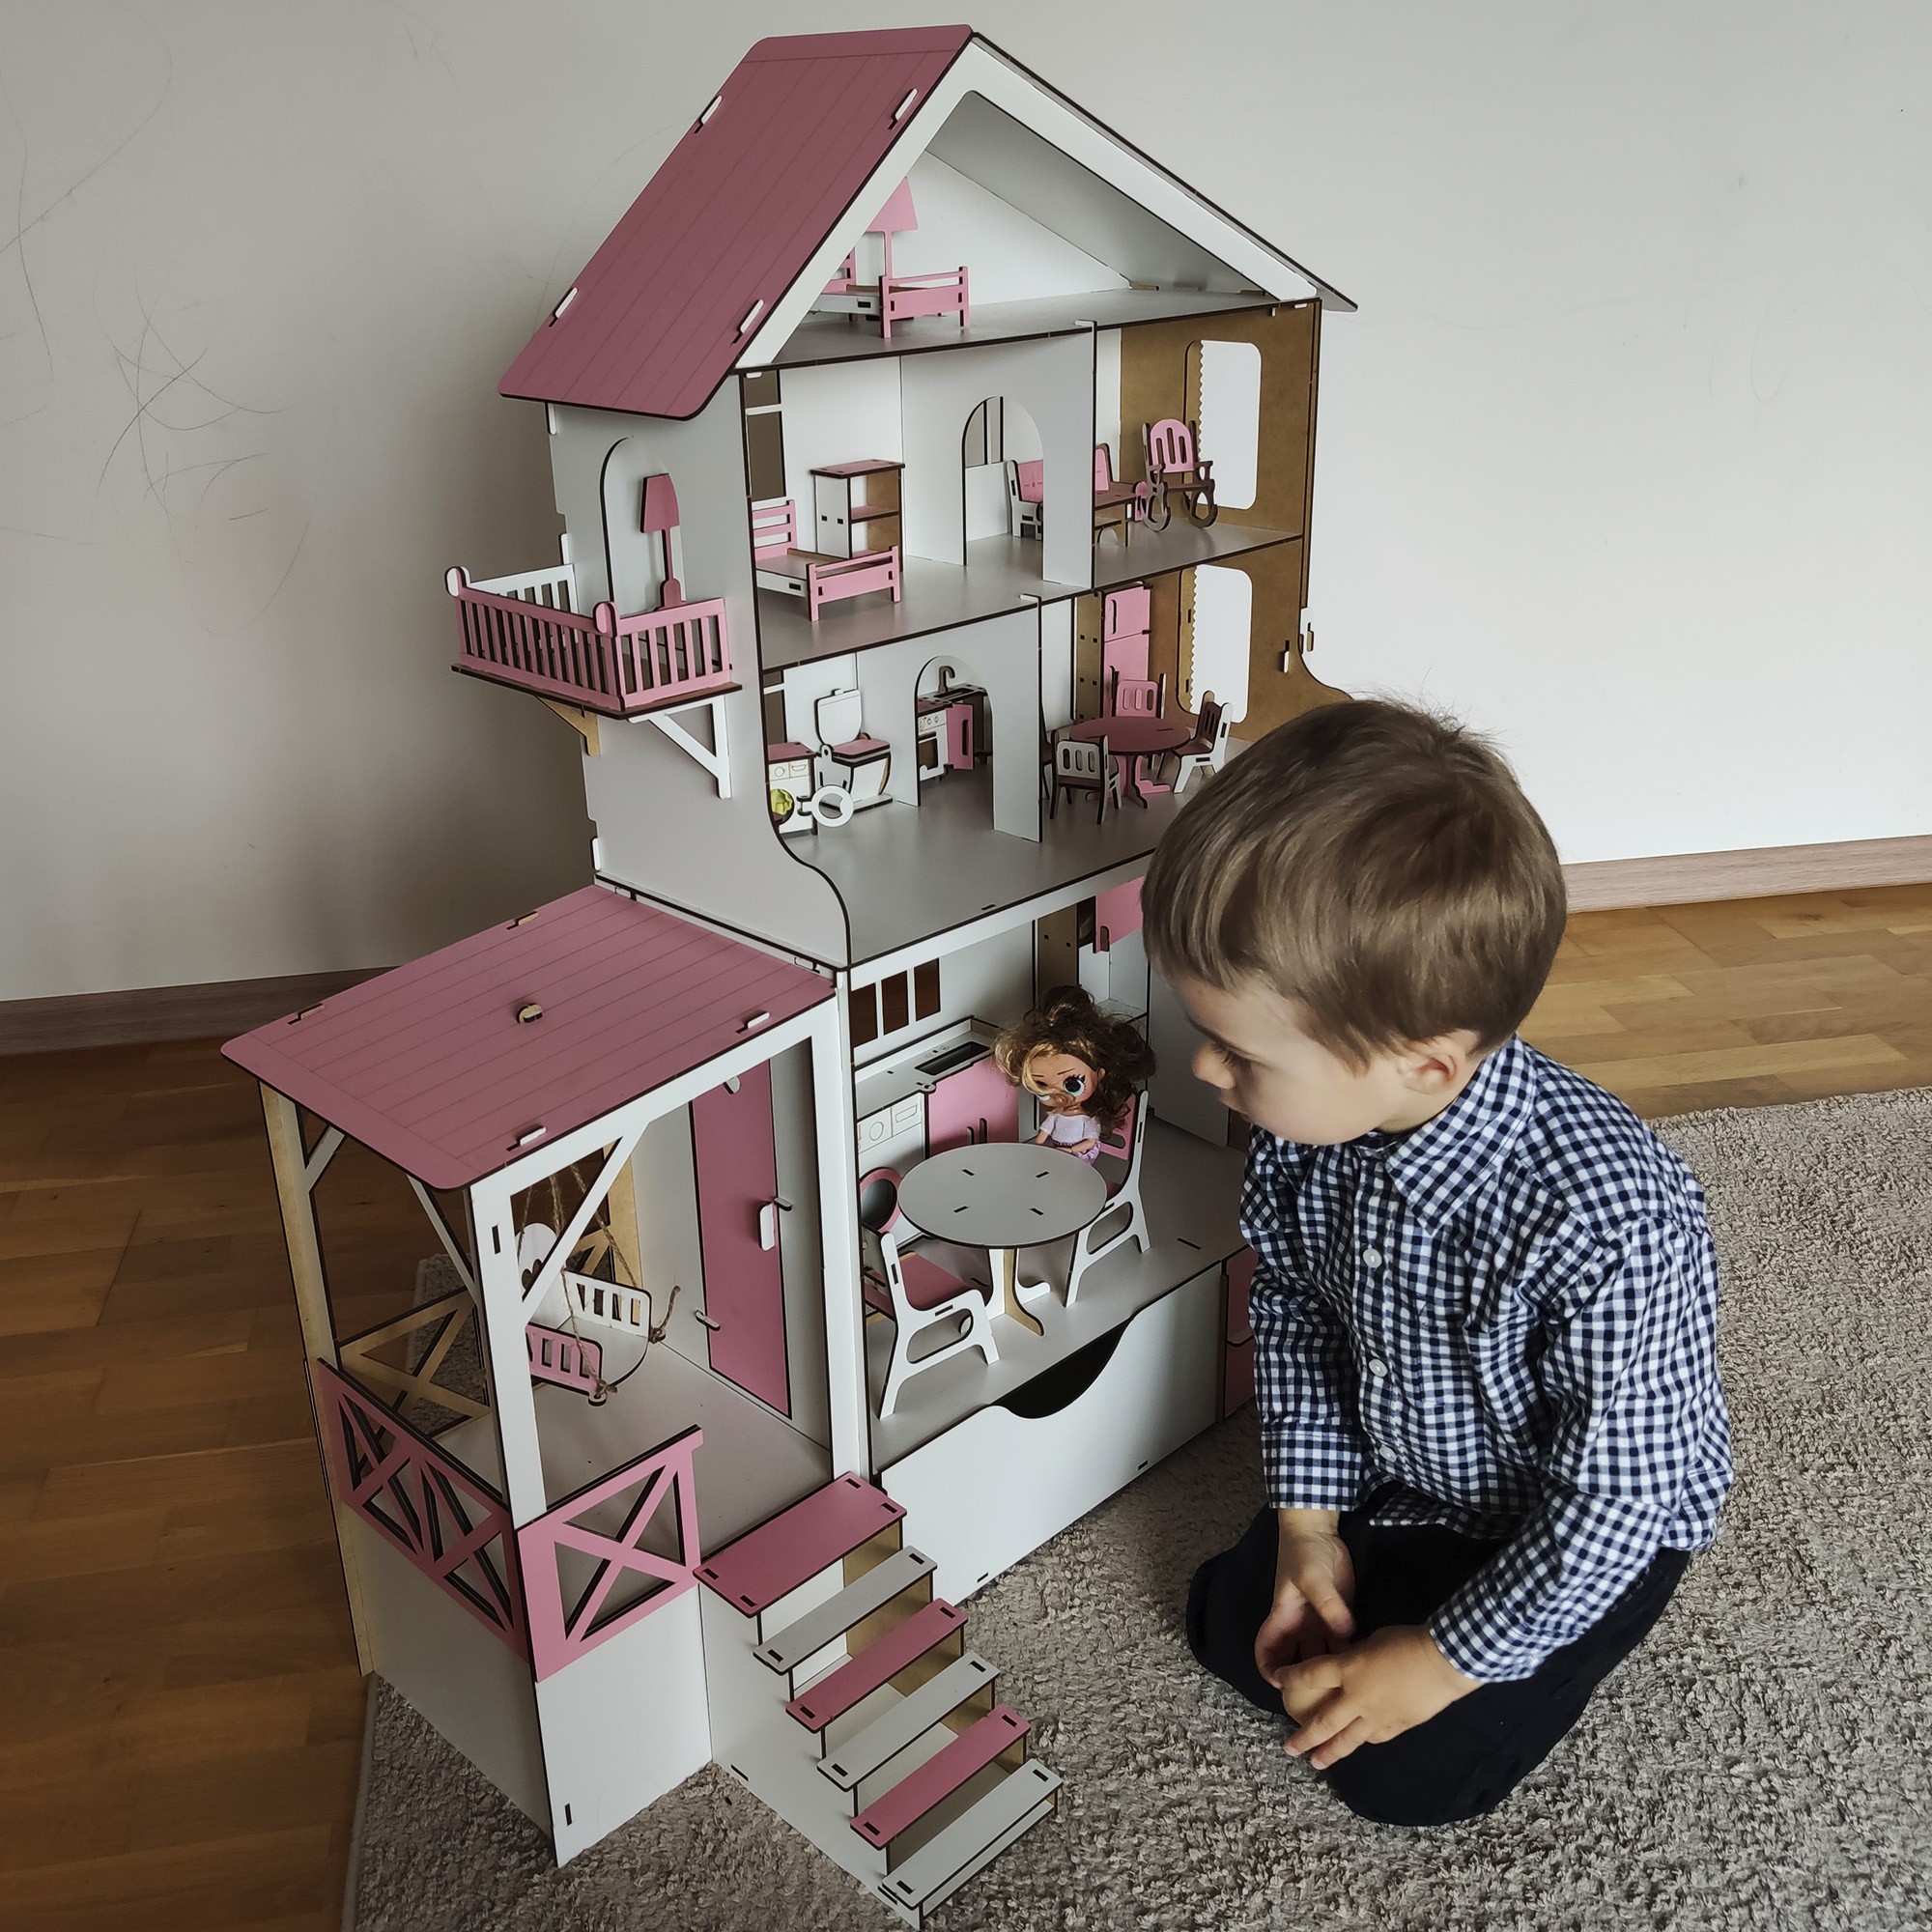 Simulation Doll House Music And Light 3D Folding Early Education